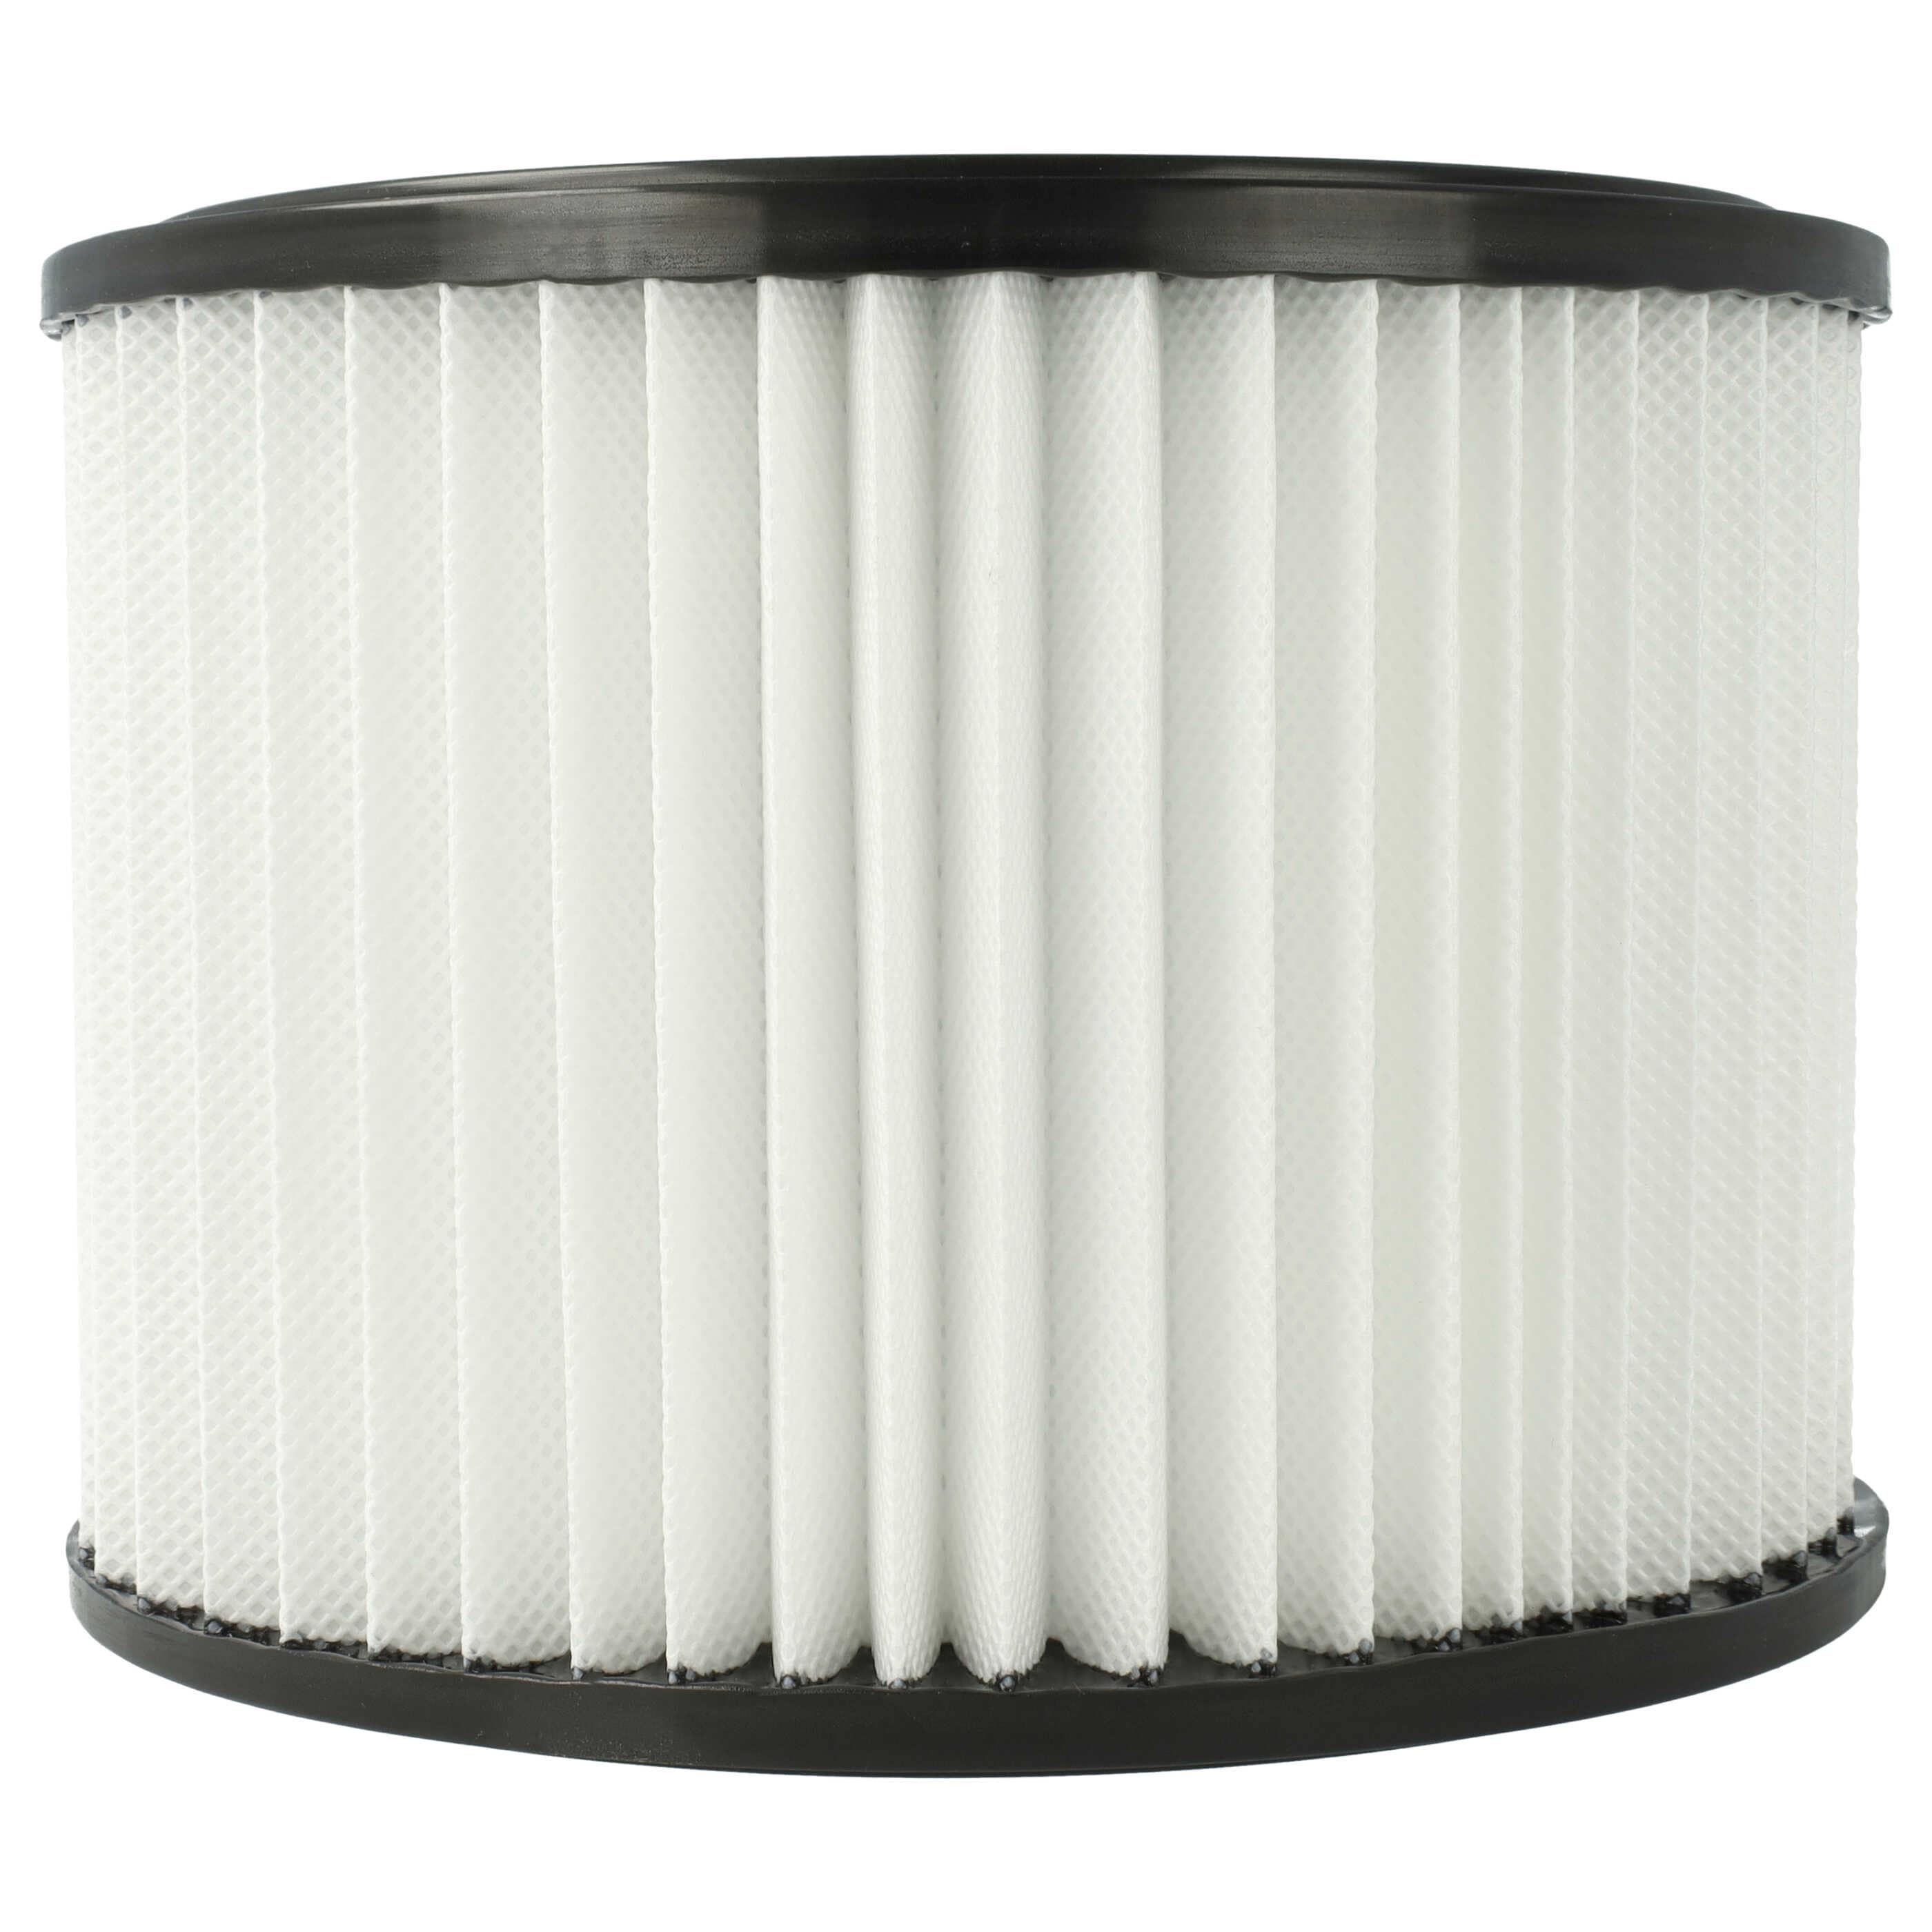 1x filter element replaces Nilfisk 107417194 for NilfiskVacuum Cleaner